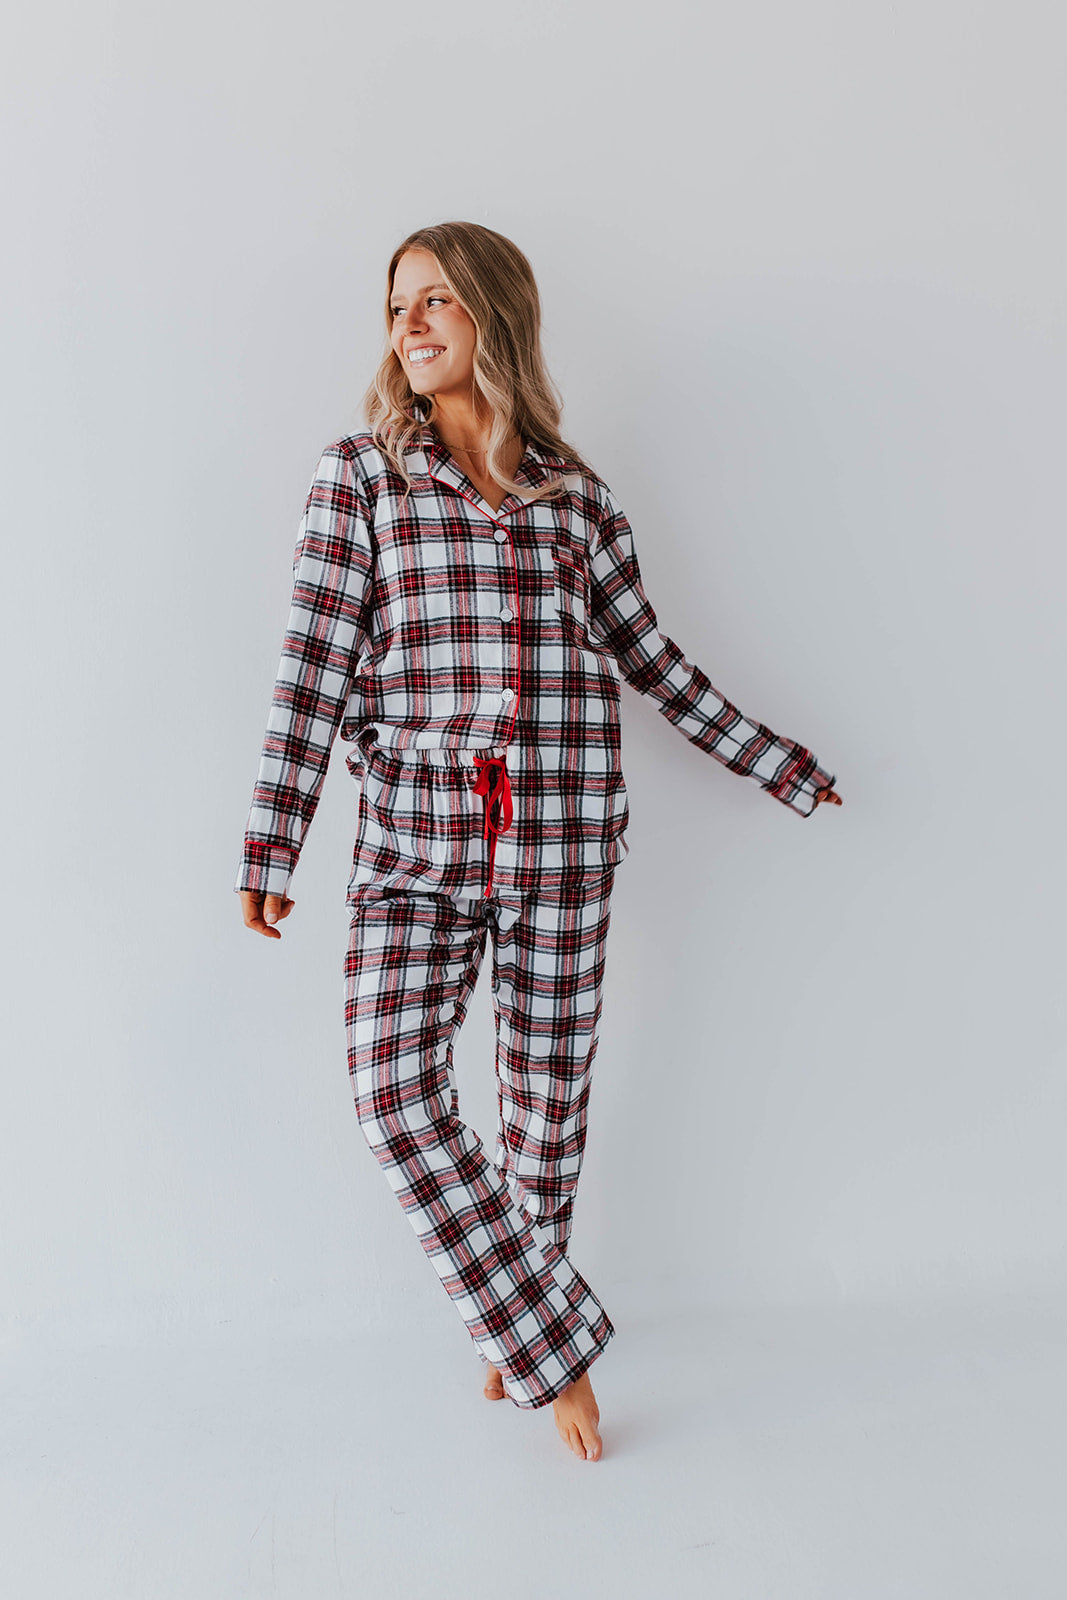 IN THE PLAID Pink RED FLANNEL PAJAMAS – Desert FIRESIDE